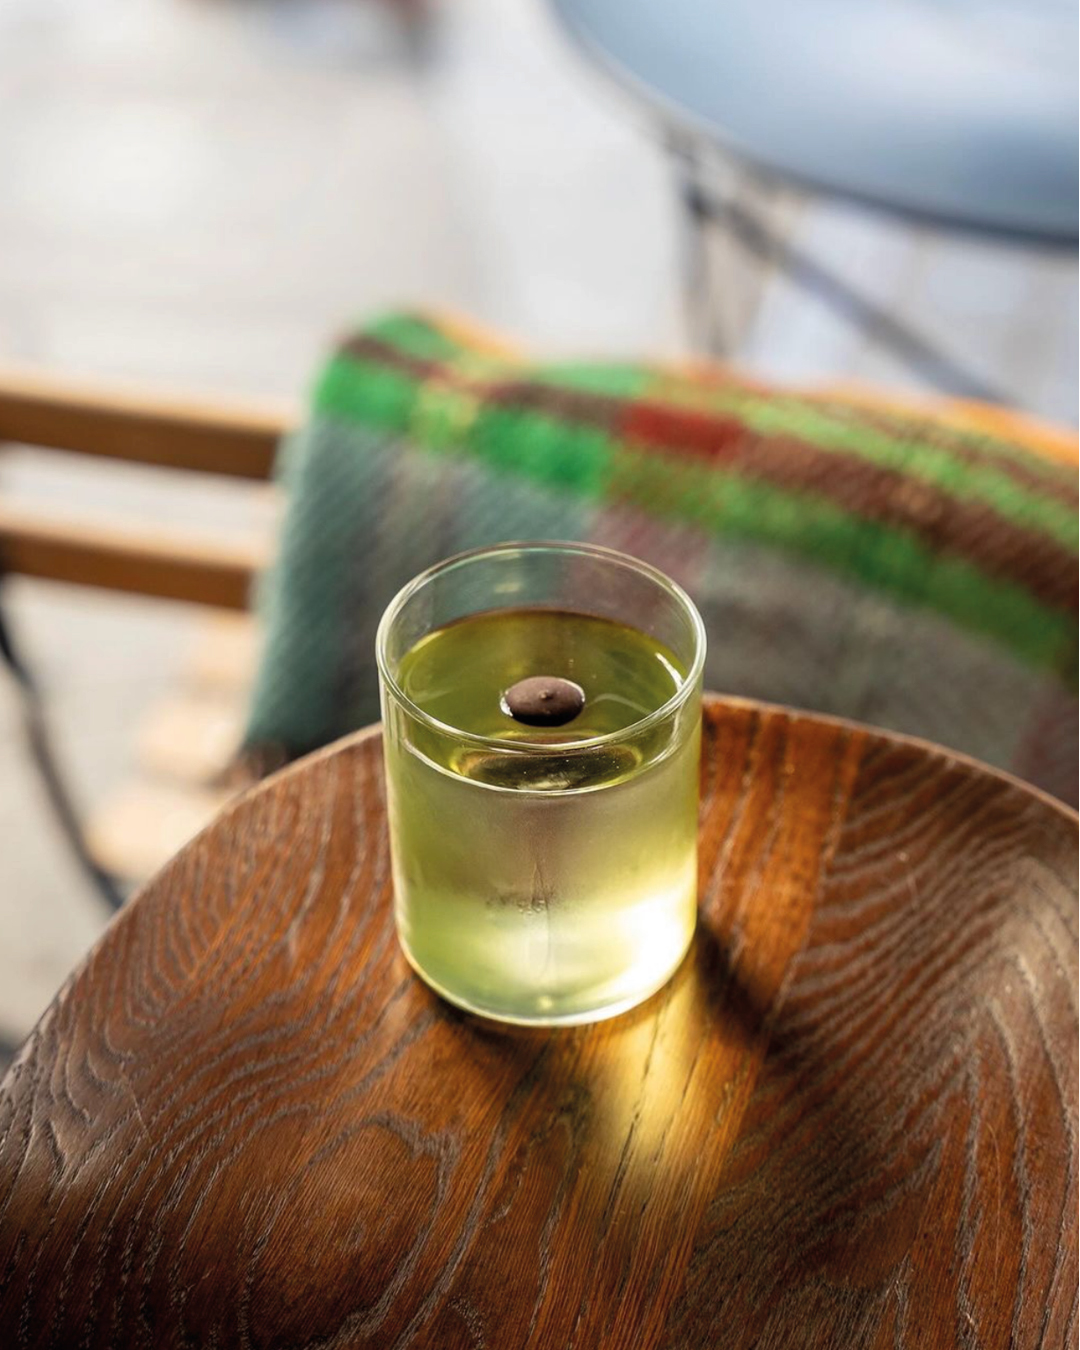 The best cocktail bars in Paris | Le Mary Celeste Grasshopper cocktail, with peppermint, salted cacao and coconut